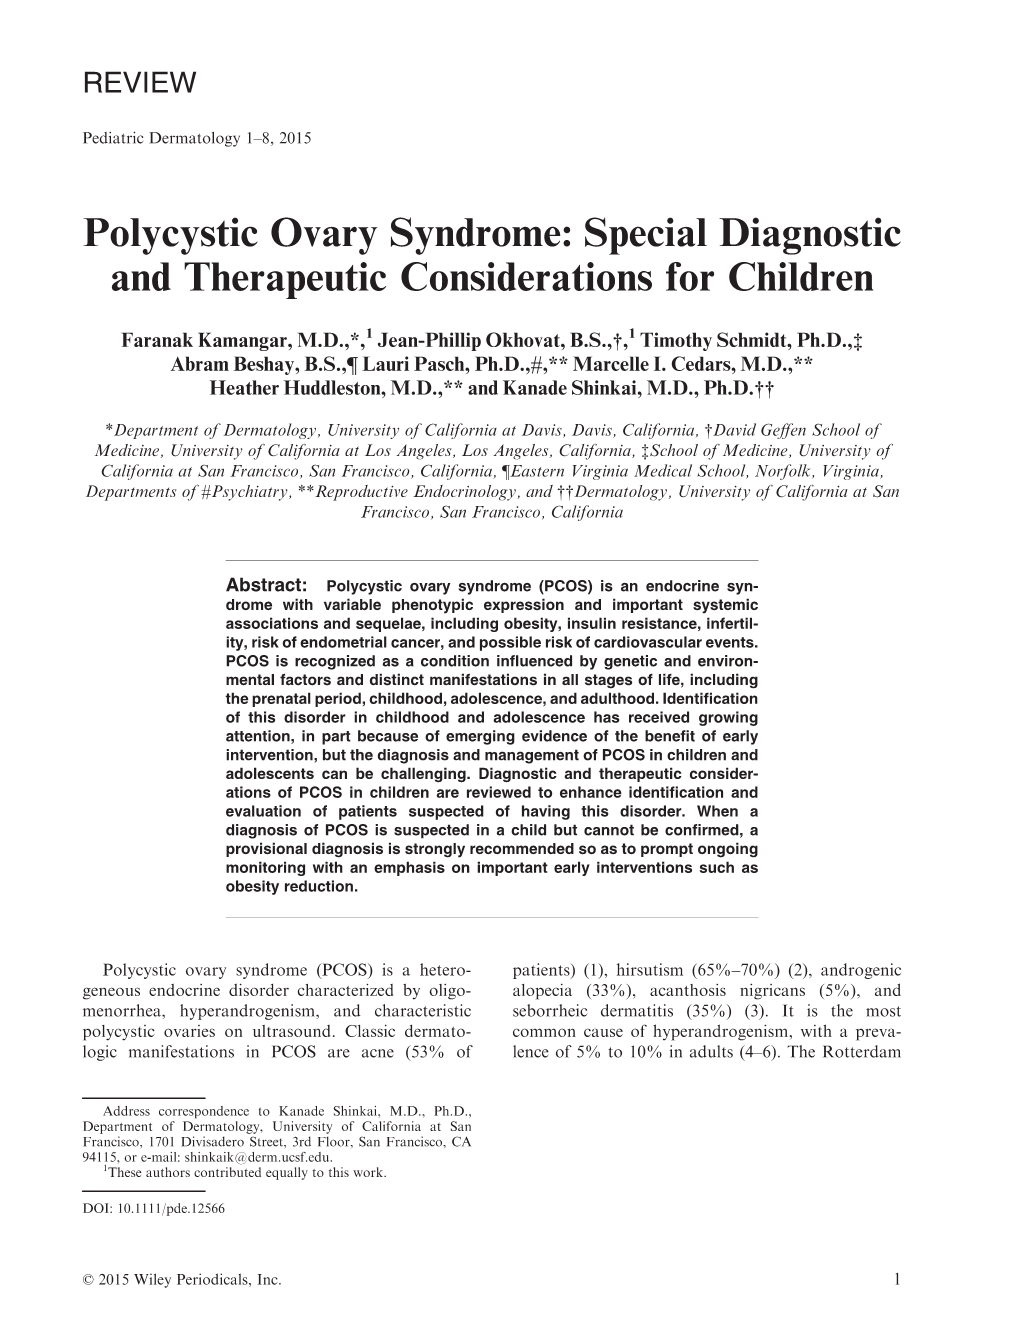 Polycystic Ovary Syndrome: Special Diagnostic and Therapeutic Considerations for Children